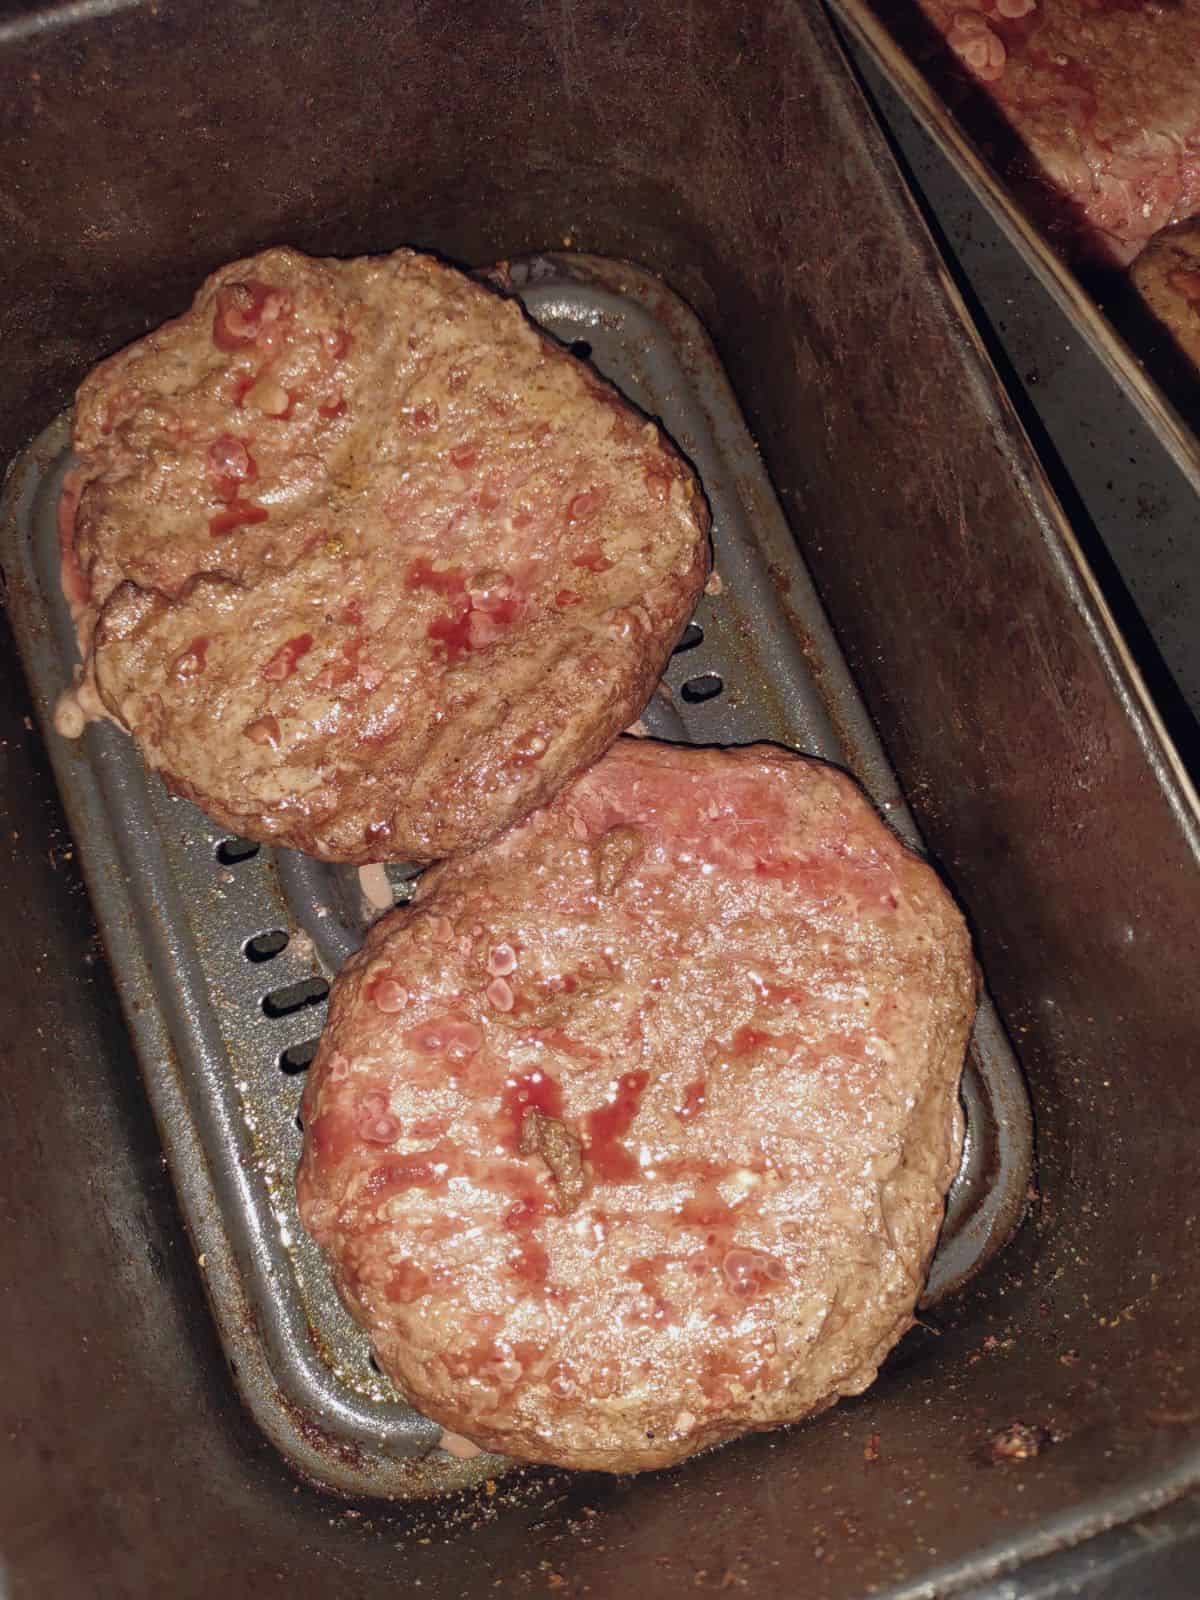 Partly cooked burger patties in an air fryer basket.